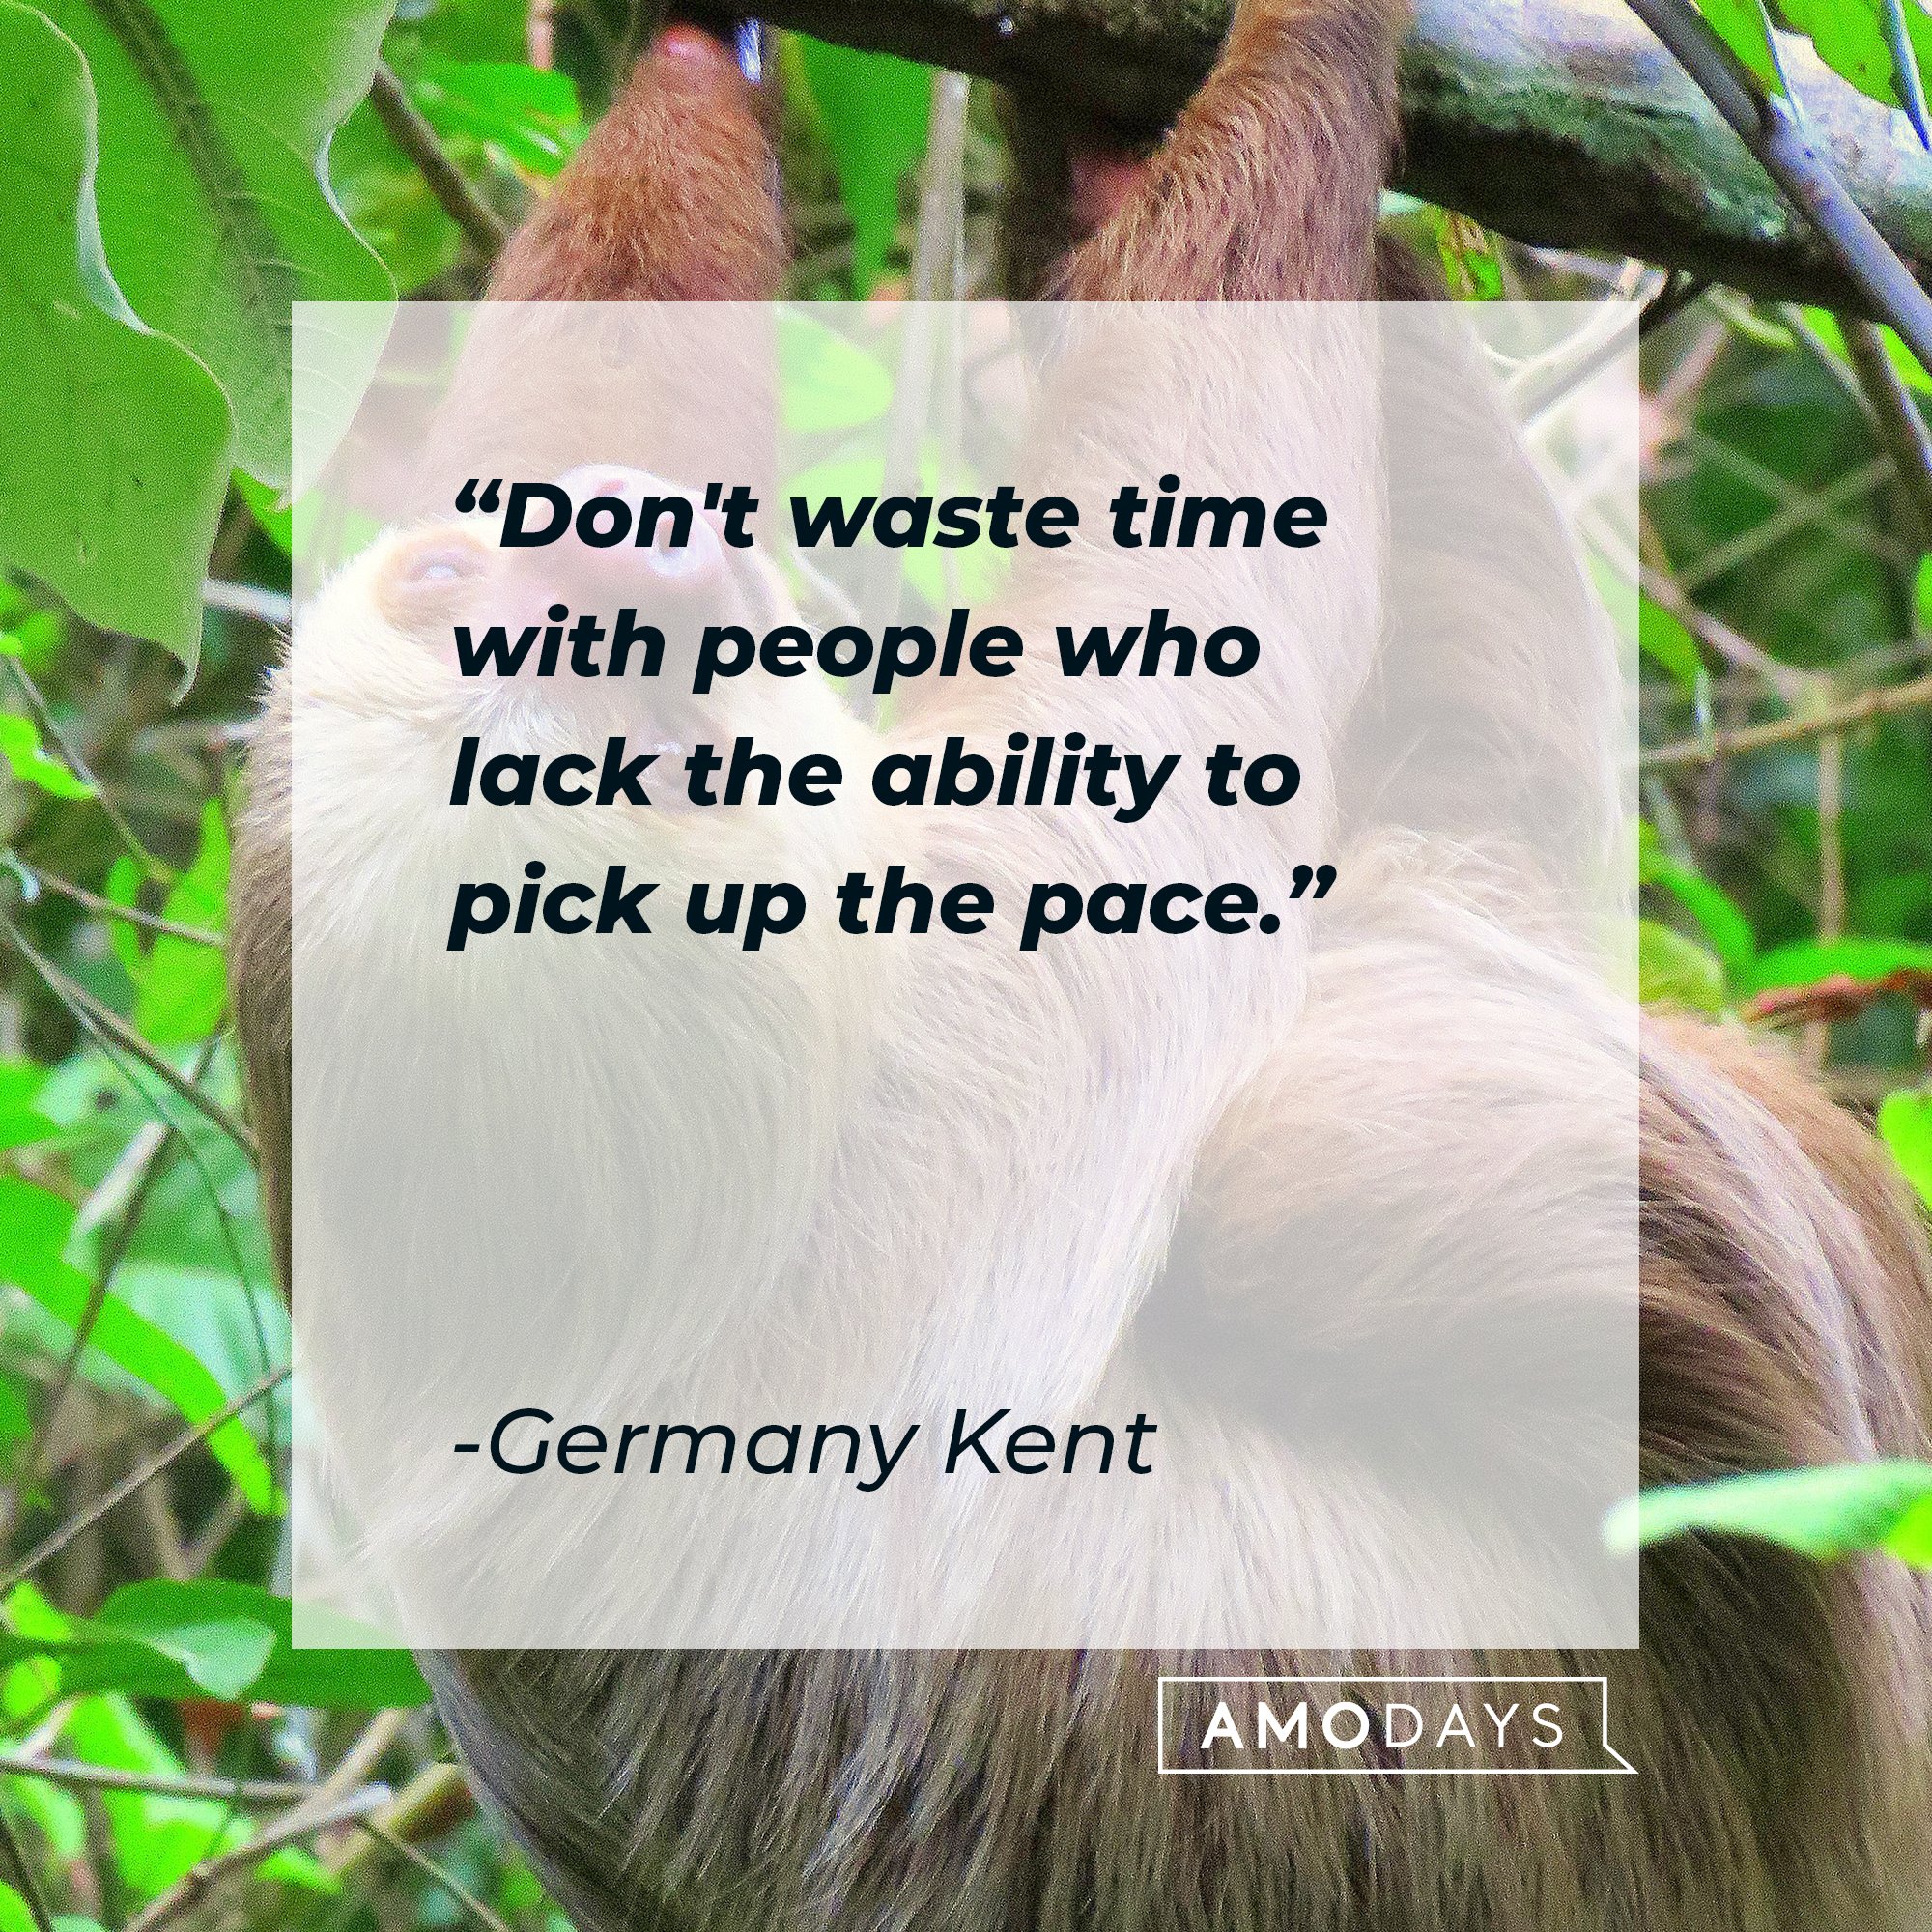 Germany Kent’s quote: "Don't waste time with people who lack the ability to pick up the pace." | Image: AmoDays